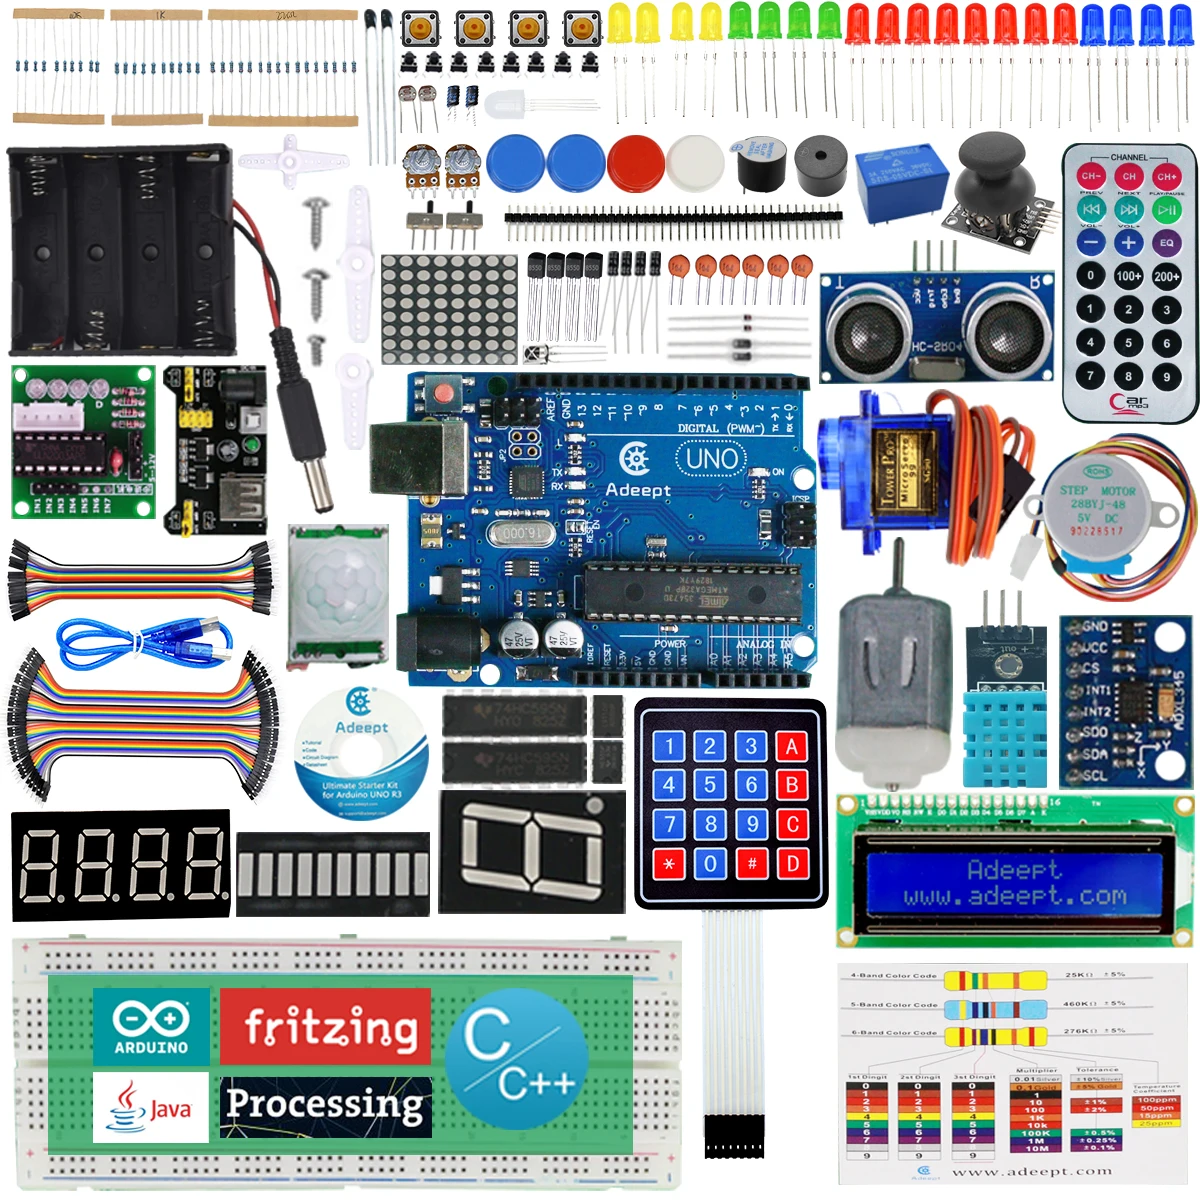 

Adeept Ultimate Starter Kit for Arduino UNO R3, LCD1602, Servo Motor, Relay, Processing and C Code, Kit with 140 Pages PDF